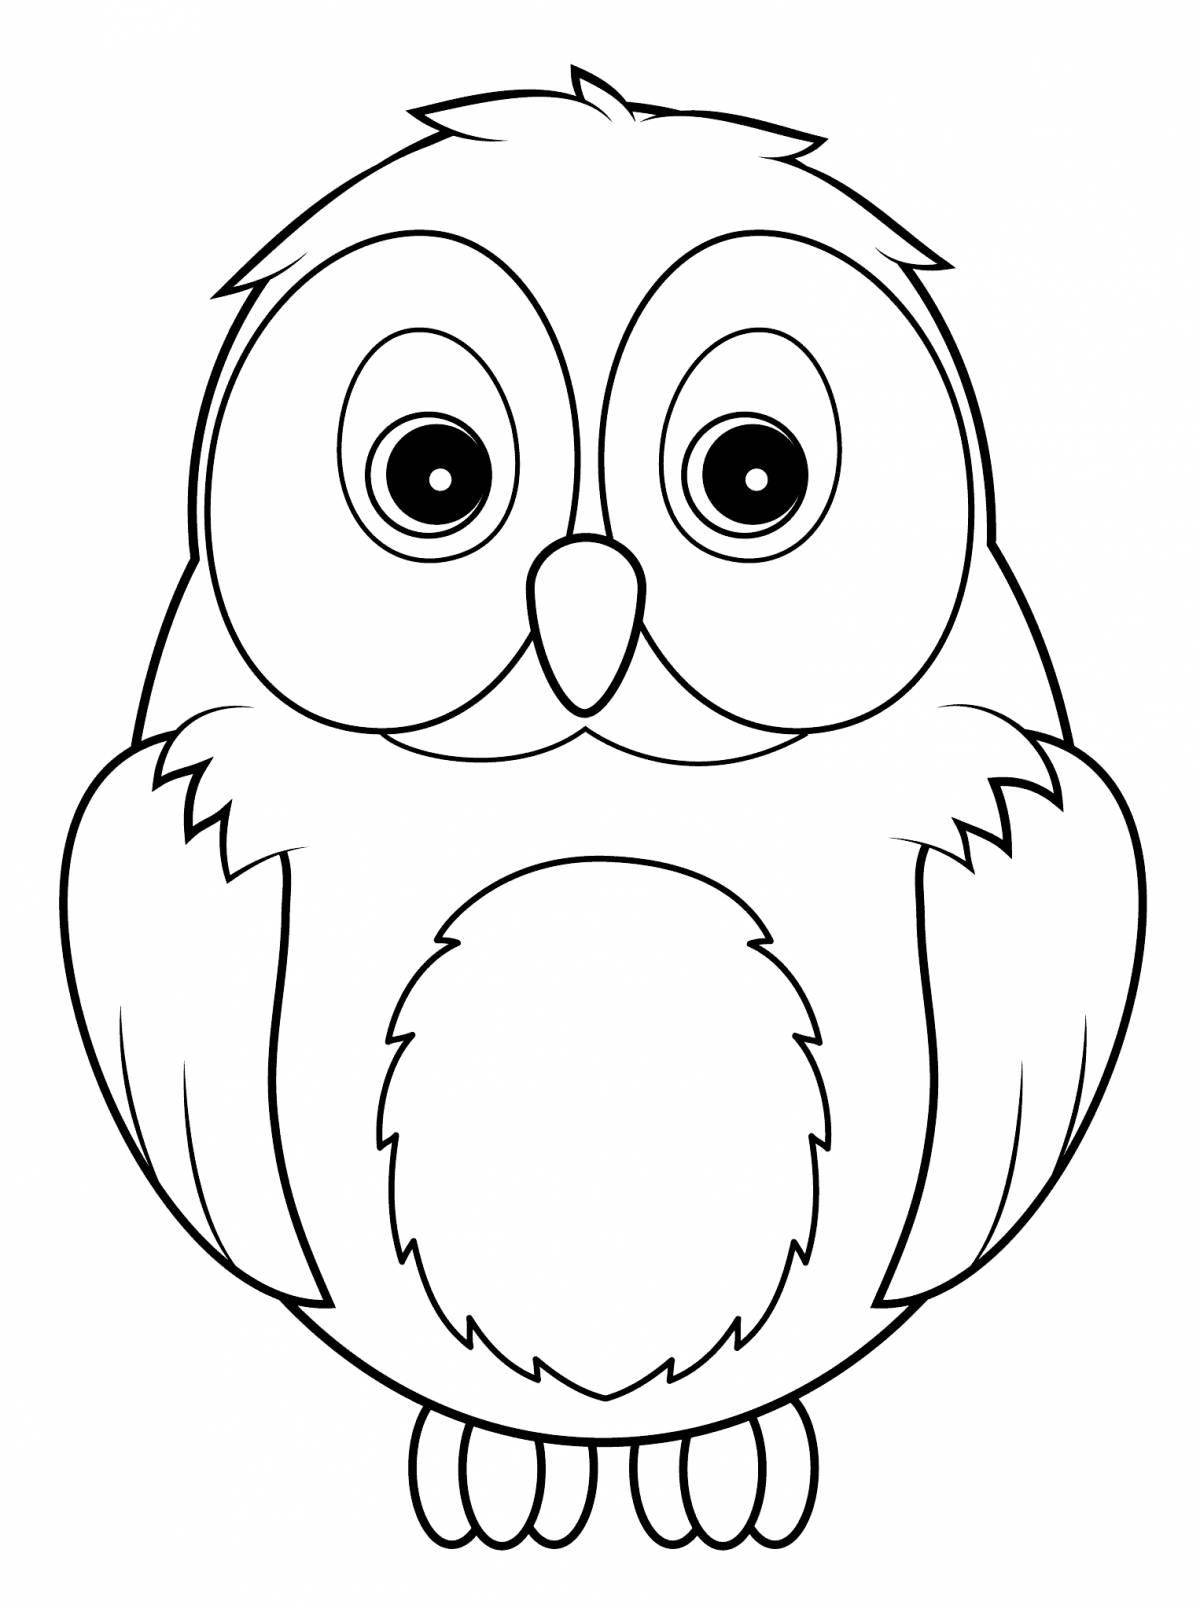 Jolly owl in the hollow for children 2-3 years old